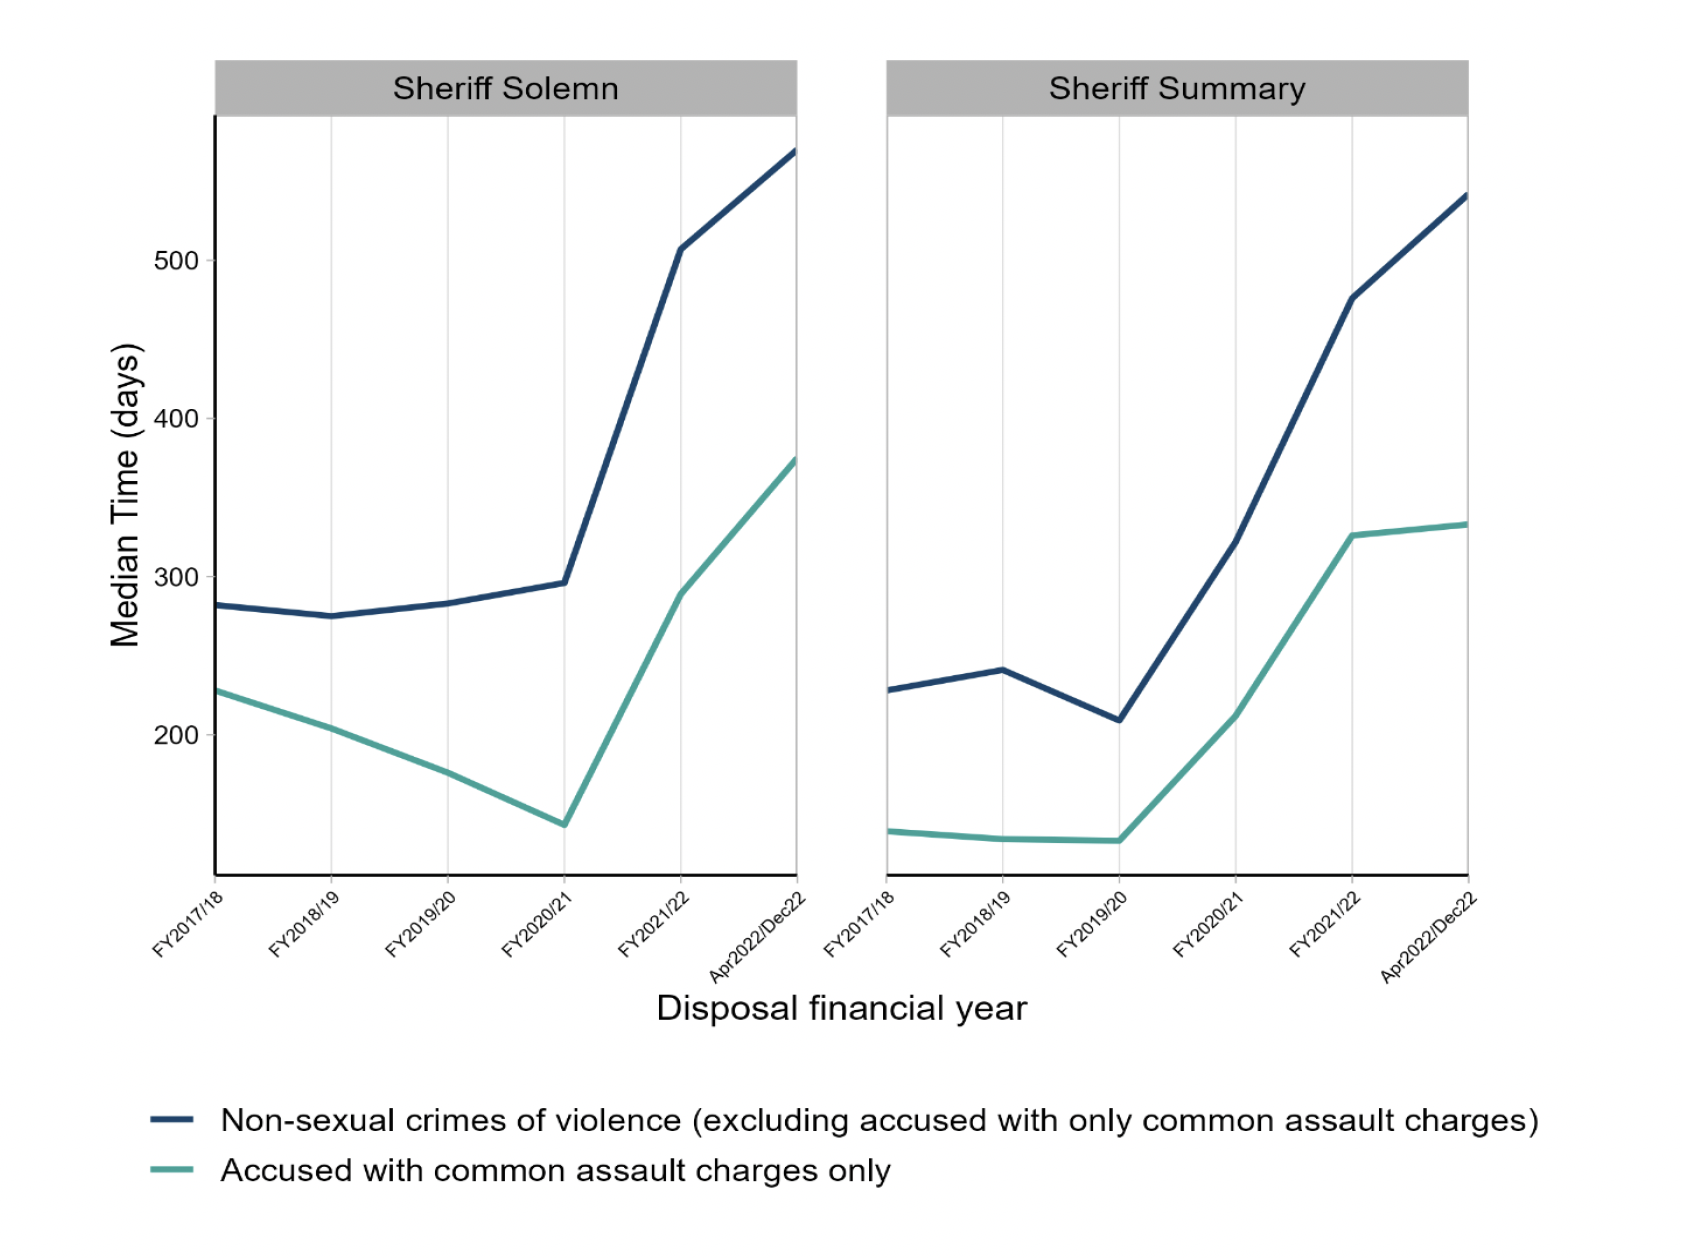 Figure 9: Two line charts showing offence to verdict median times for accused with only common assault charges and non-sexual crimes of violence excluding common assault only in Sheriff Solemn and Sheriff Summary showing that median times for accused with only common assault charges are lower.